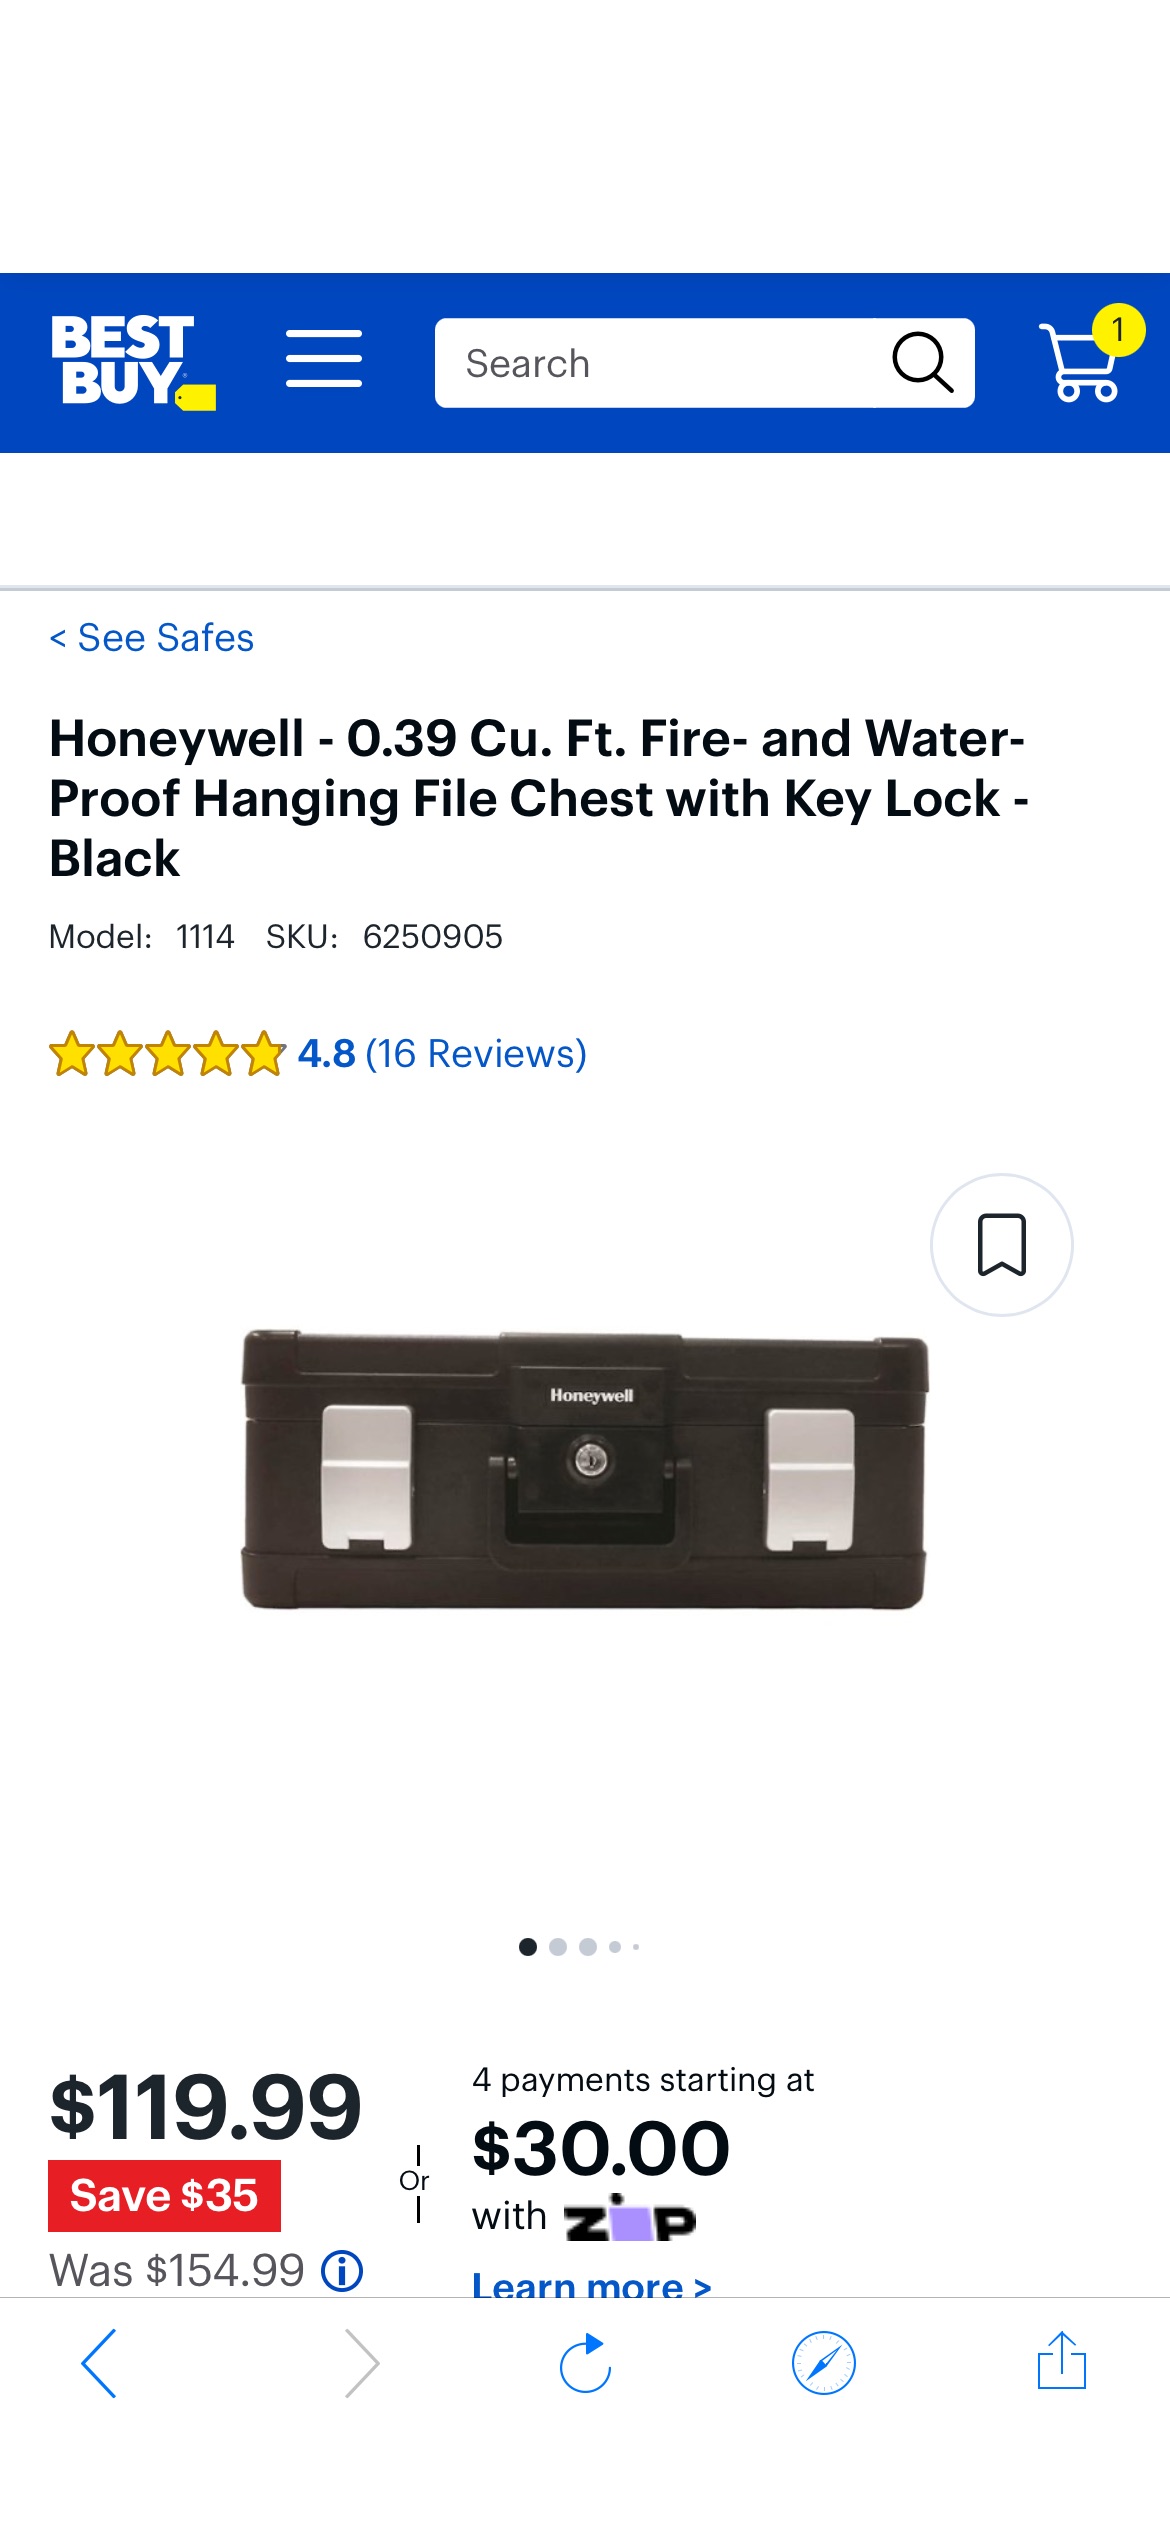 Honeywell 0.39 Cu. Ft. Fire- and Water-Proof Hanging File Chest with Key Lock Black 1114 - Best Buy